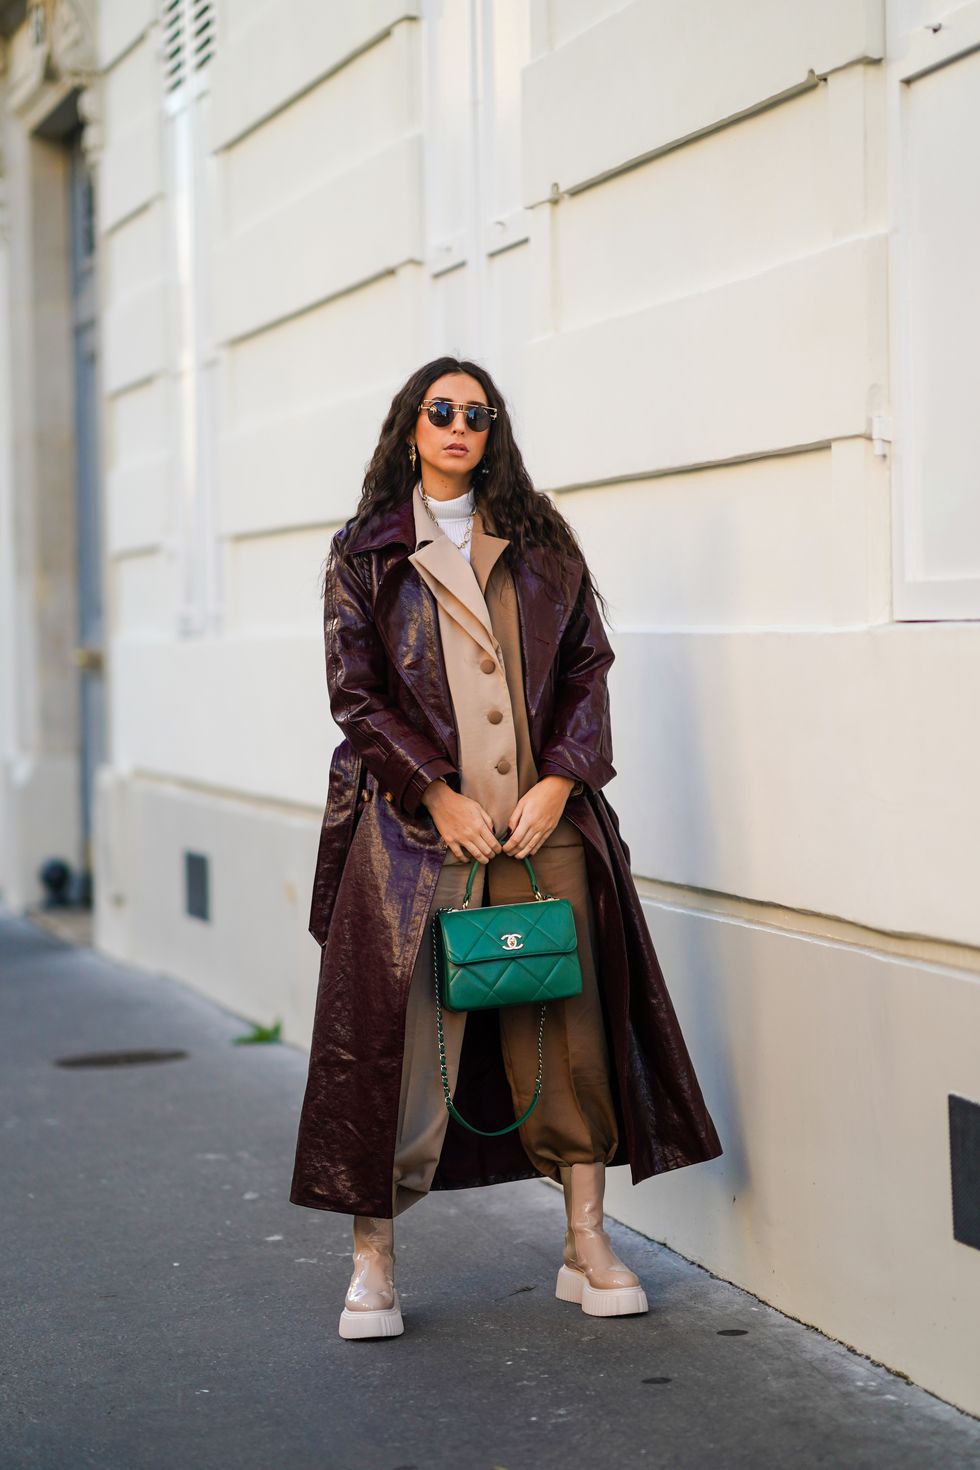 paris, france   december 15 gabriella berdugo wears  sunglasses, a white turtleneck pullover, earrings, a necklace, a bi color beige and brown oversized blazer jacket and suit pants from salisa nyc, beige nude biker platform shiny boots from agl, a leather vynil aubergine colored  purple trench coat from maison natan, a green quilted leather chanel bag, on december 15, 2020 in paris, france photo by edward berthelotgetty images